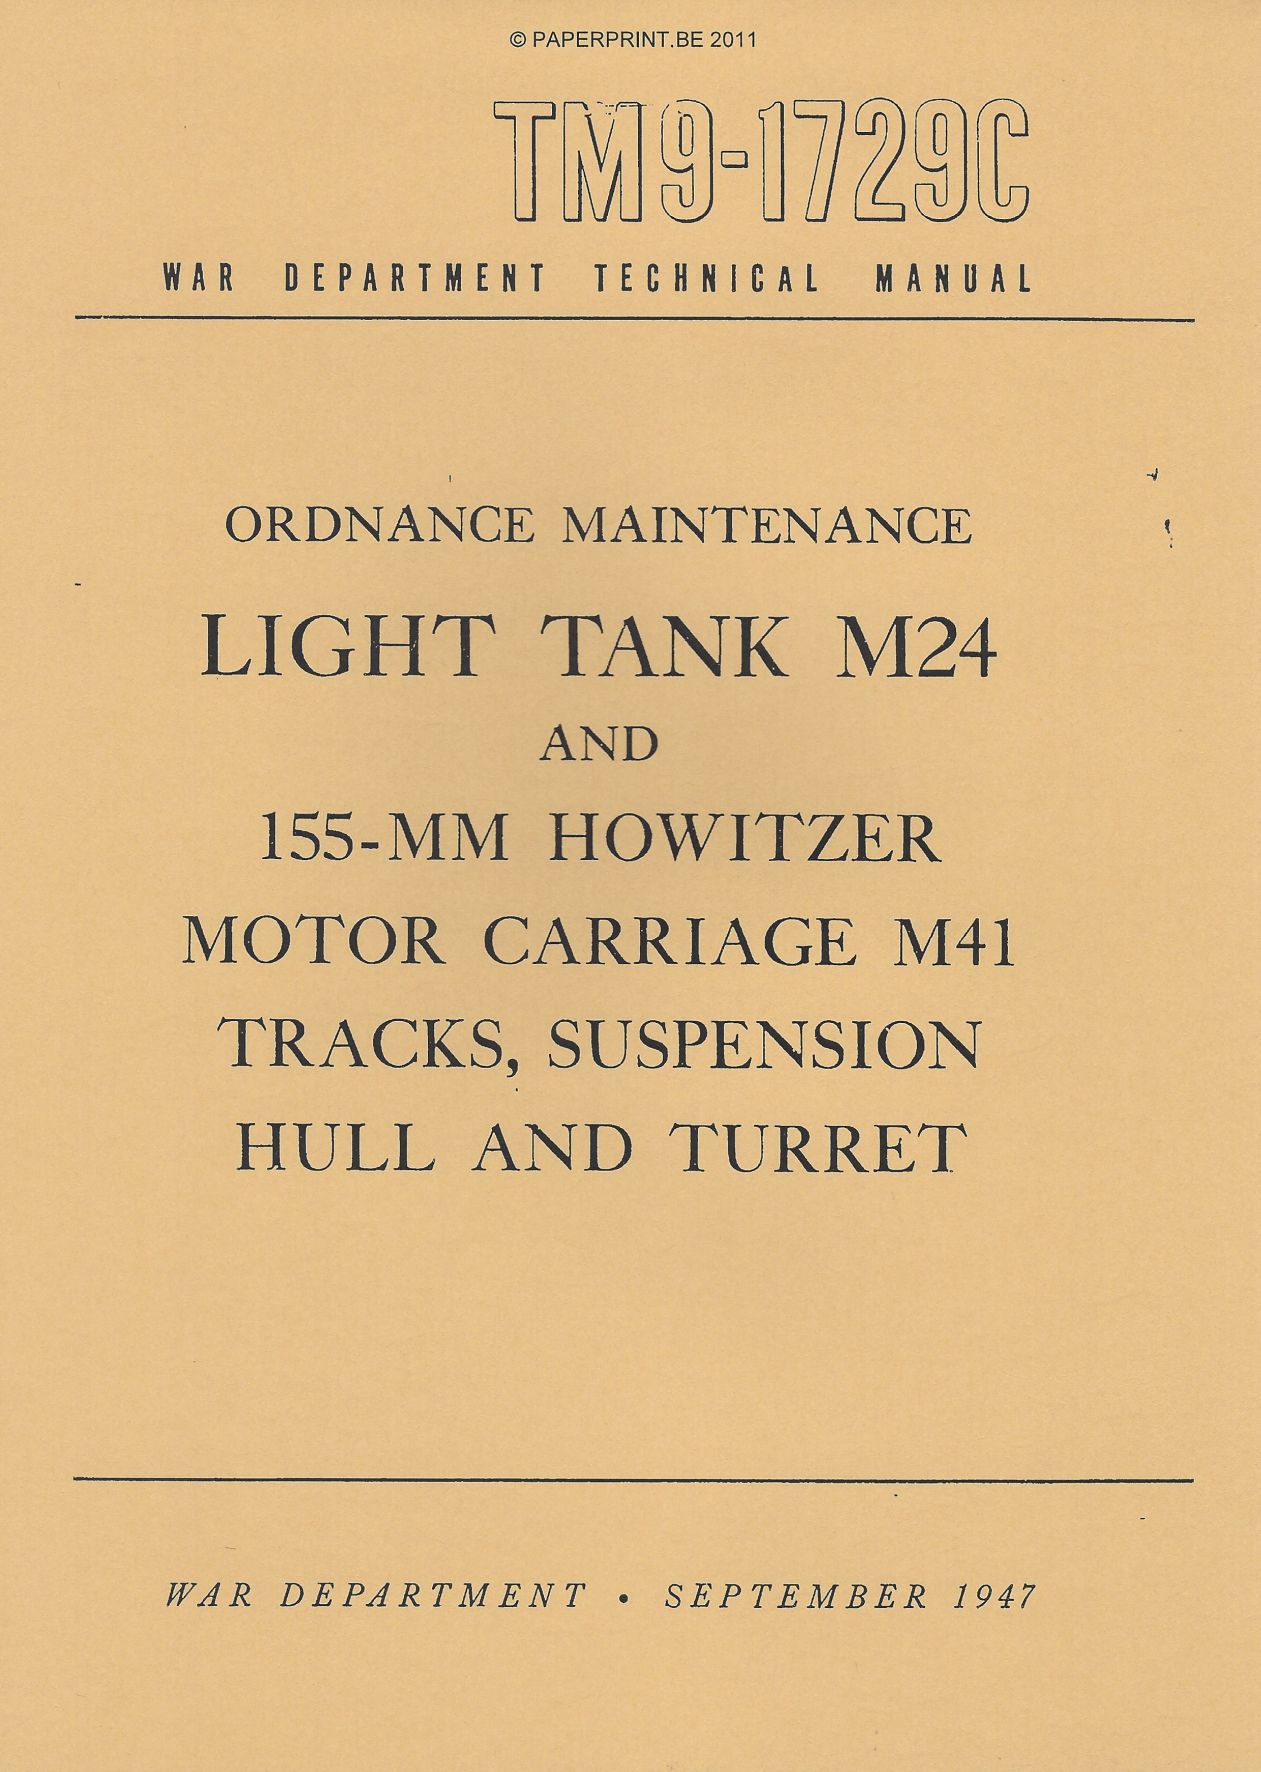 TM 9-1729C US LIGHT TANK M24 AND 155-HOWITZER MOTOR CARRIAGE M41 TRACKS, SUSPENSION HULL AND TURRET